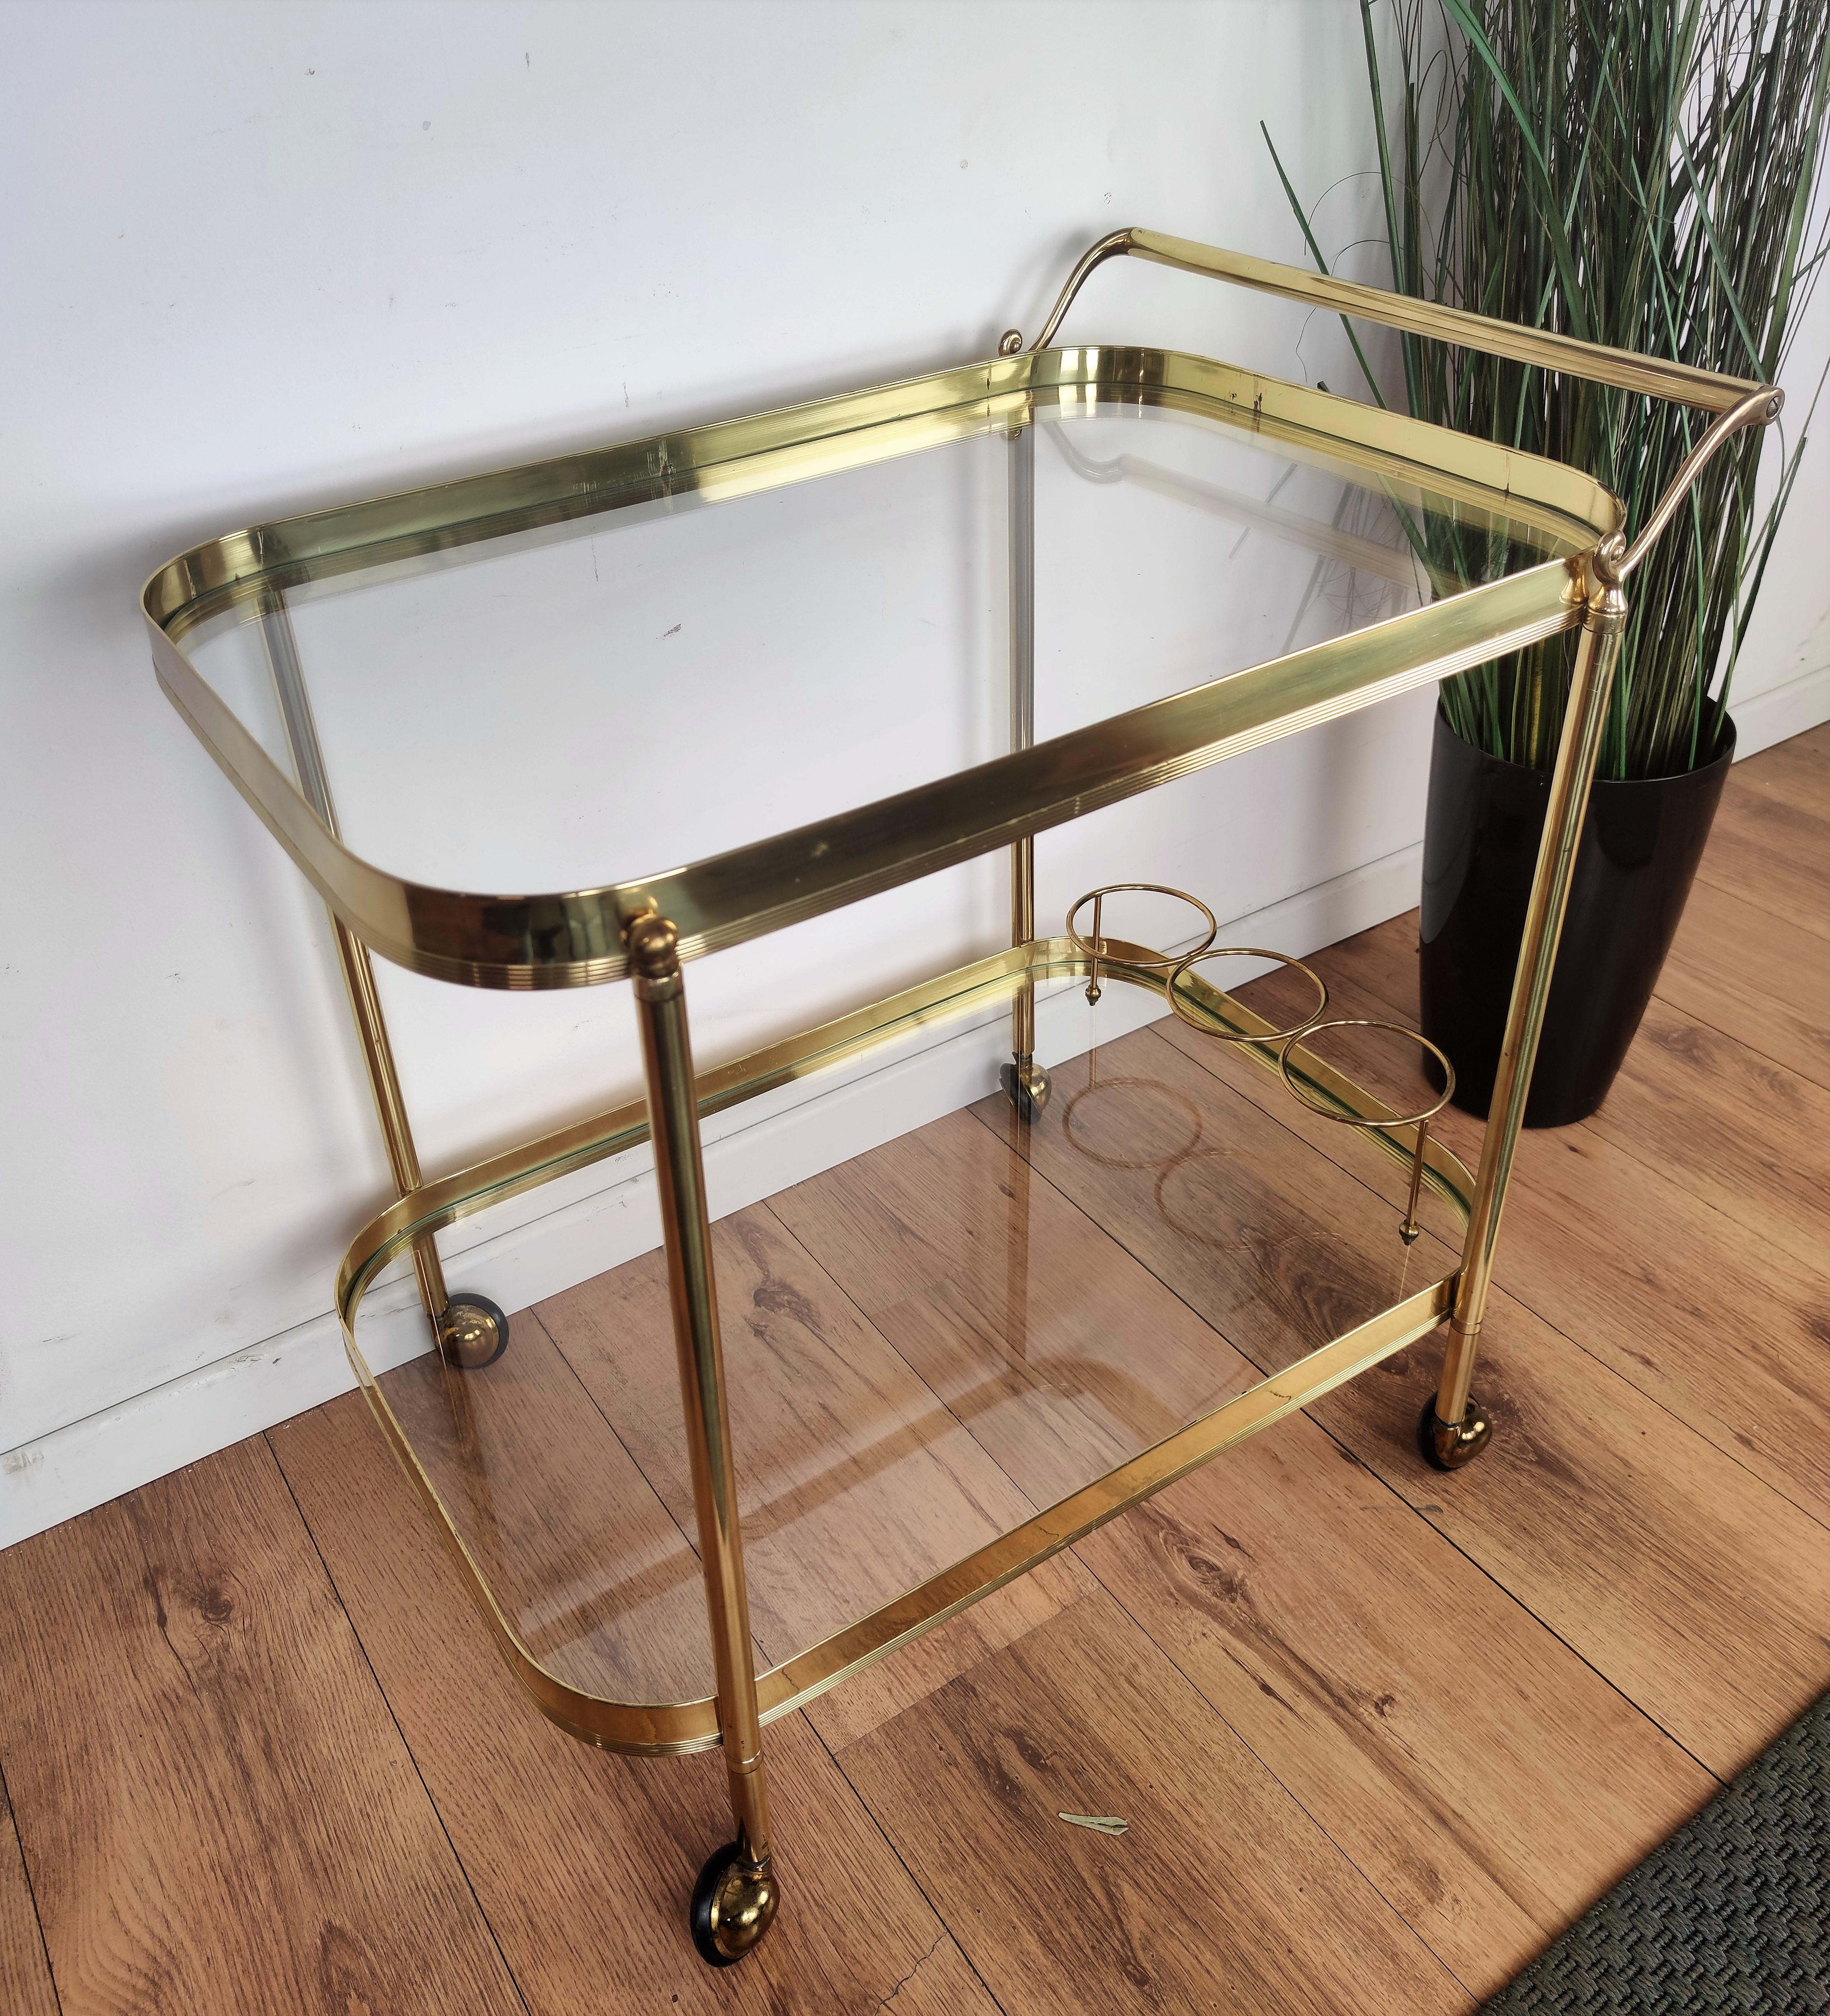 20th Century Hollywood Regency Two-Tier Brass and Glass Bar Cart, Italy, 1970s For Sale